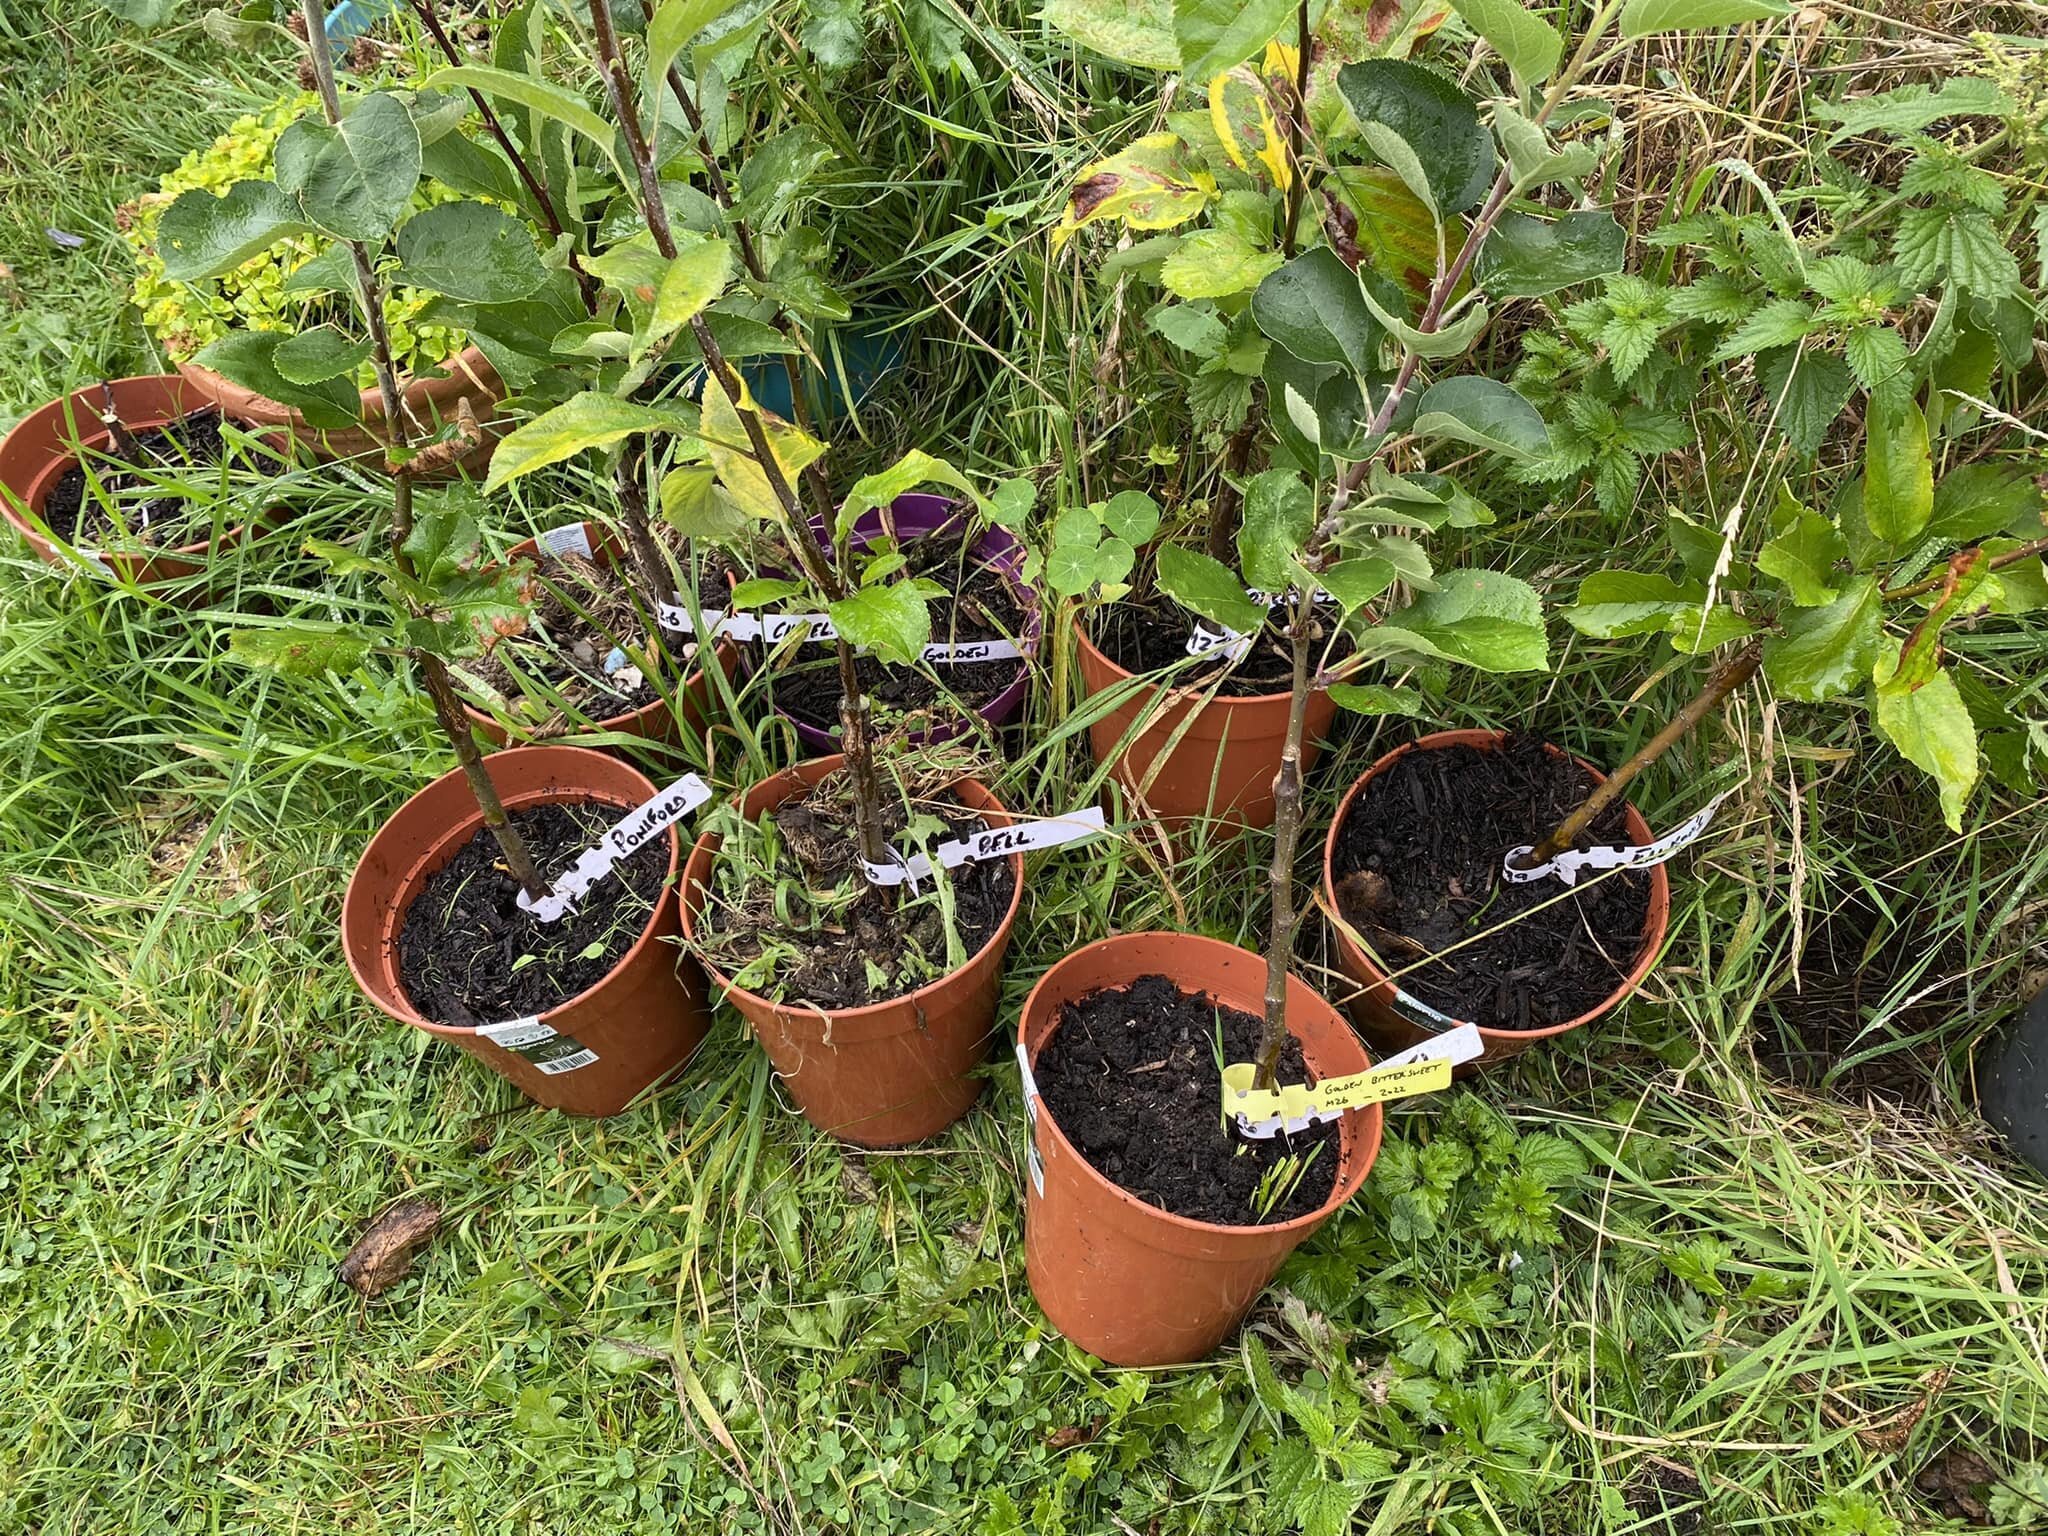 Quick update on the cider apple varieties I grafted in March - they are doing well and ready for planting out in their final positions before the winter sets in!

Thanks to Lawrence Sweeting who exchanged the scion wood with me for some dessert varie